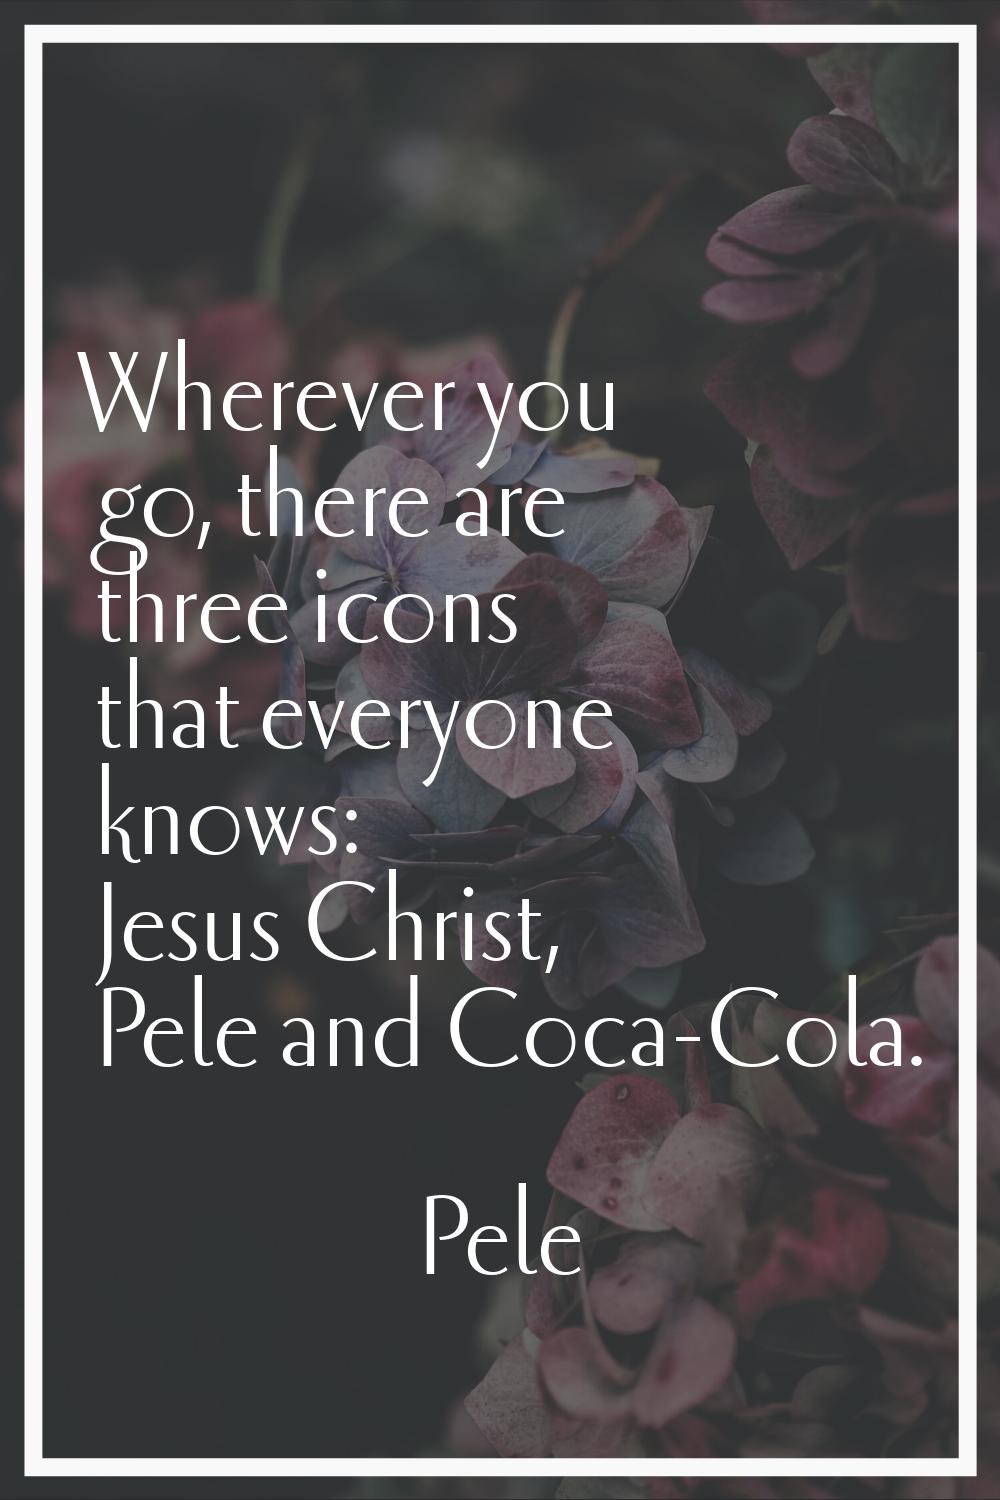 Wherever you go, there are three icons that everyone knows: Jesus Christ, Pele and Coca-Cola.